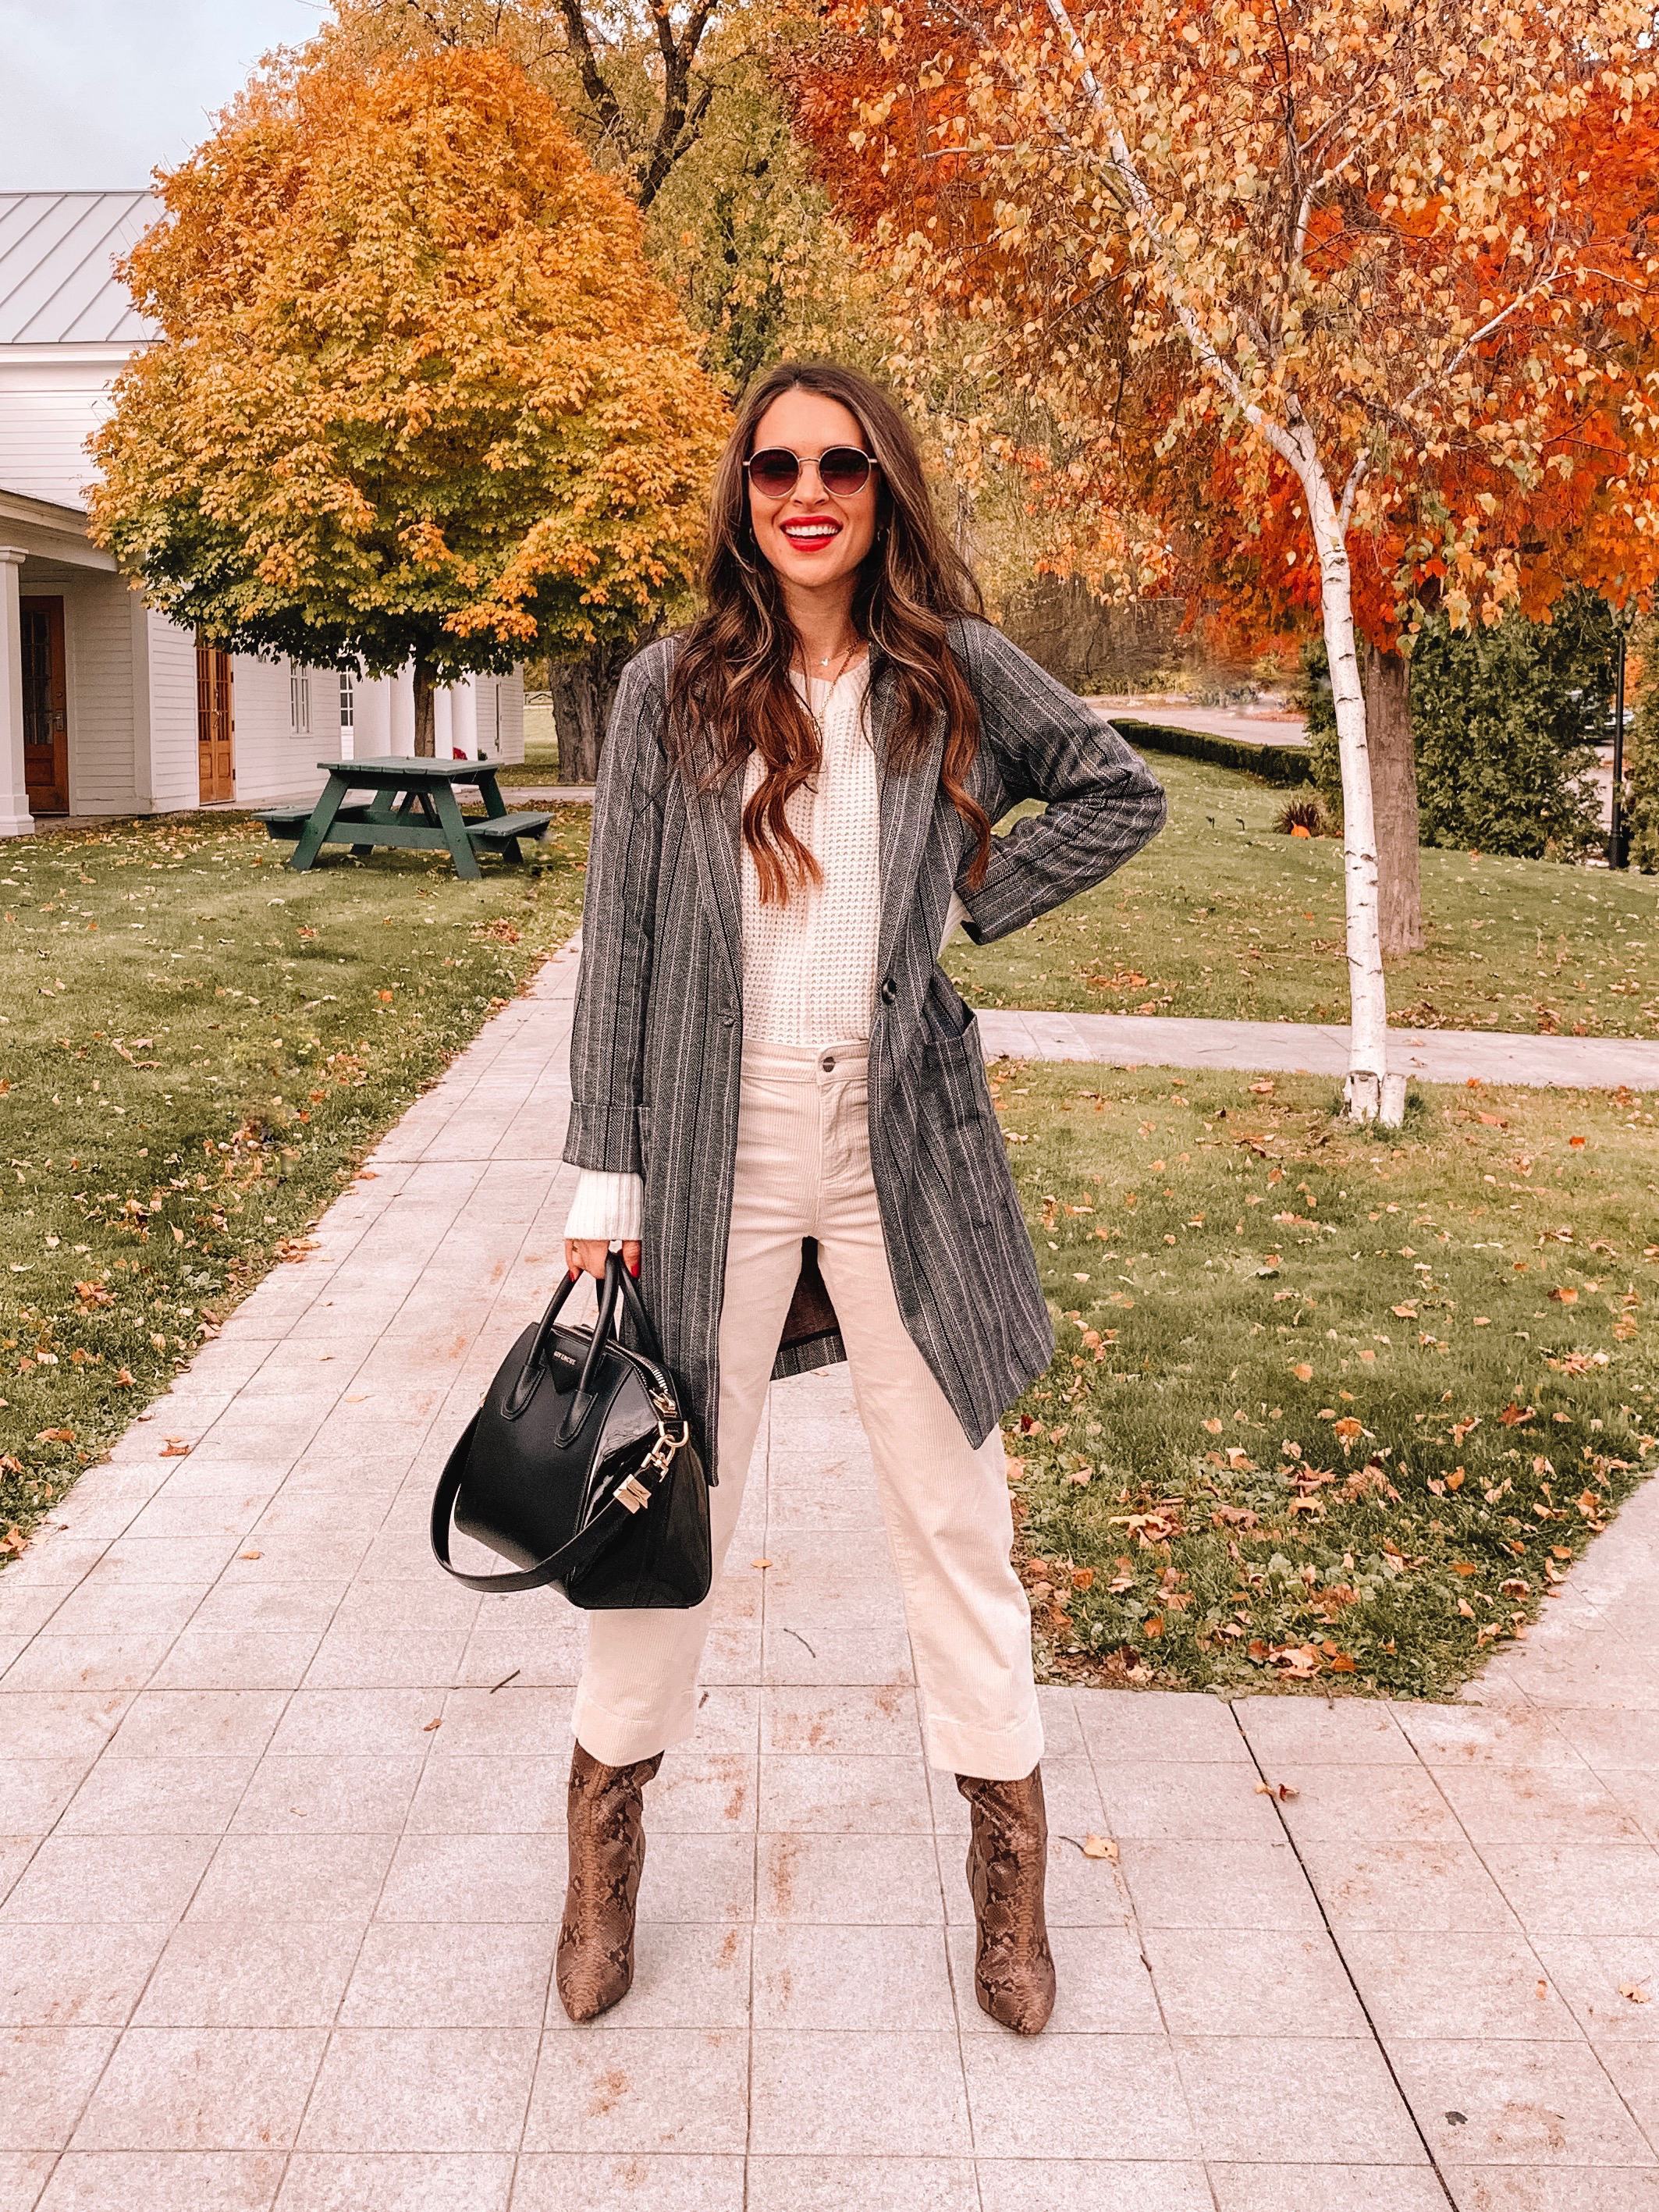 Fall Outfit: Plaid Coat